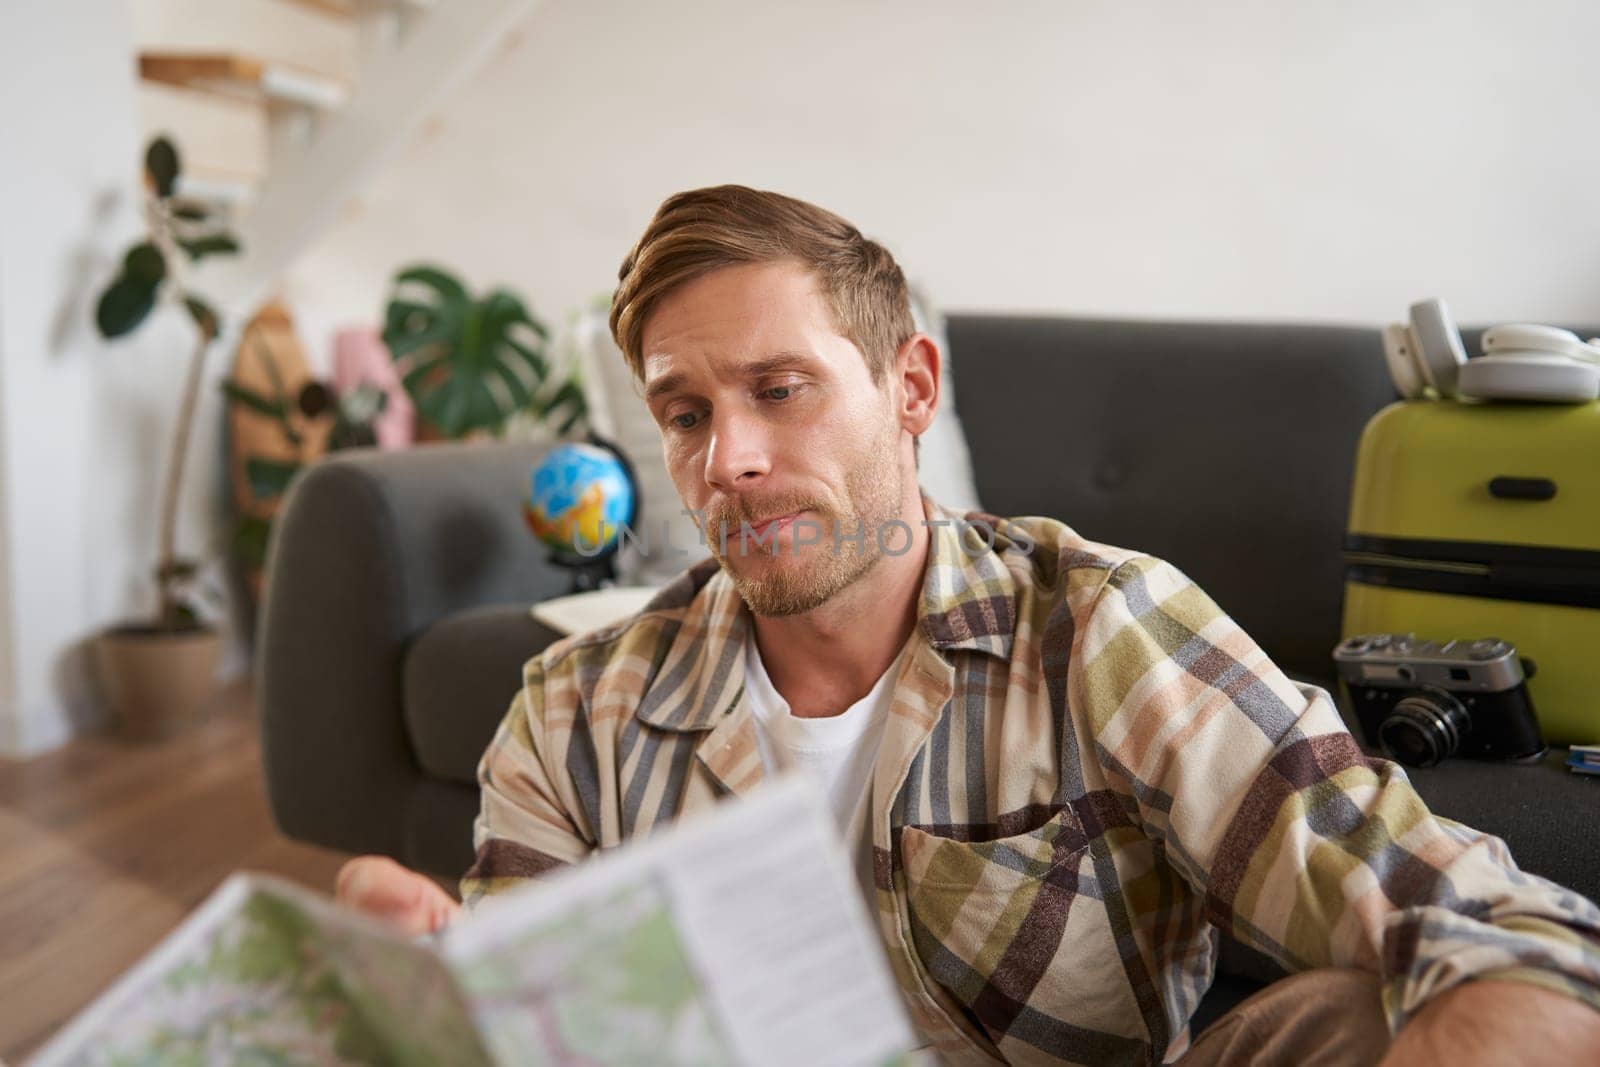 Portrait of man, traveller looks confused at map, studying the route to go on vacation or business trip. Tourism concept